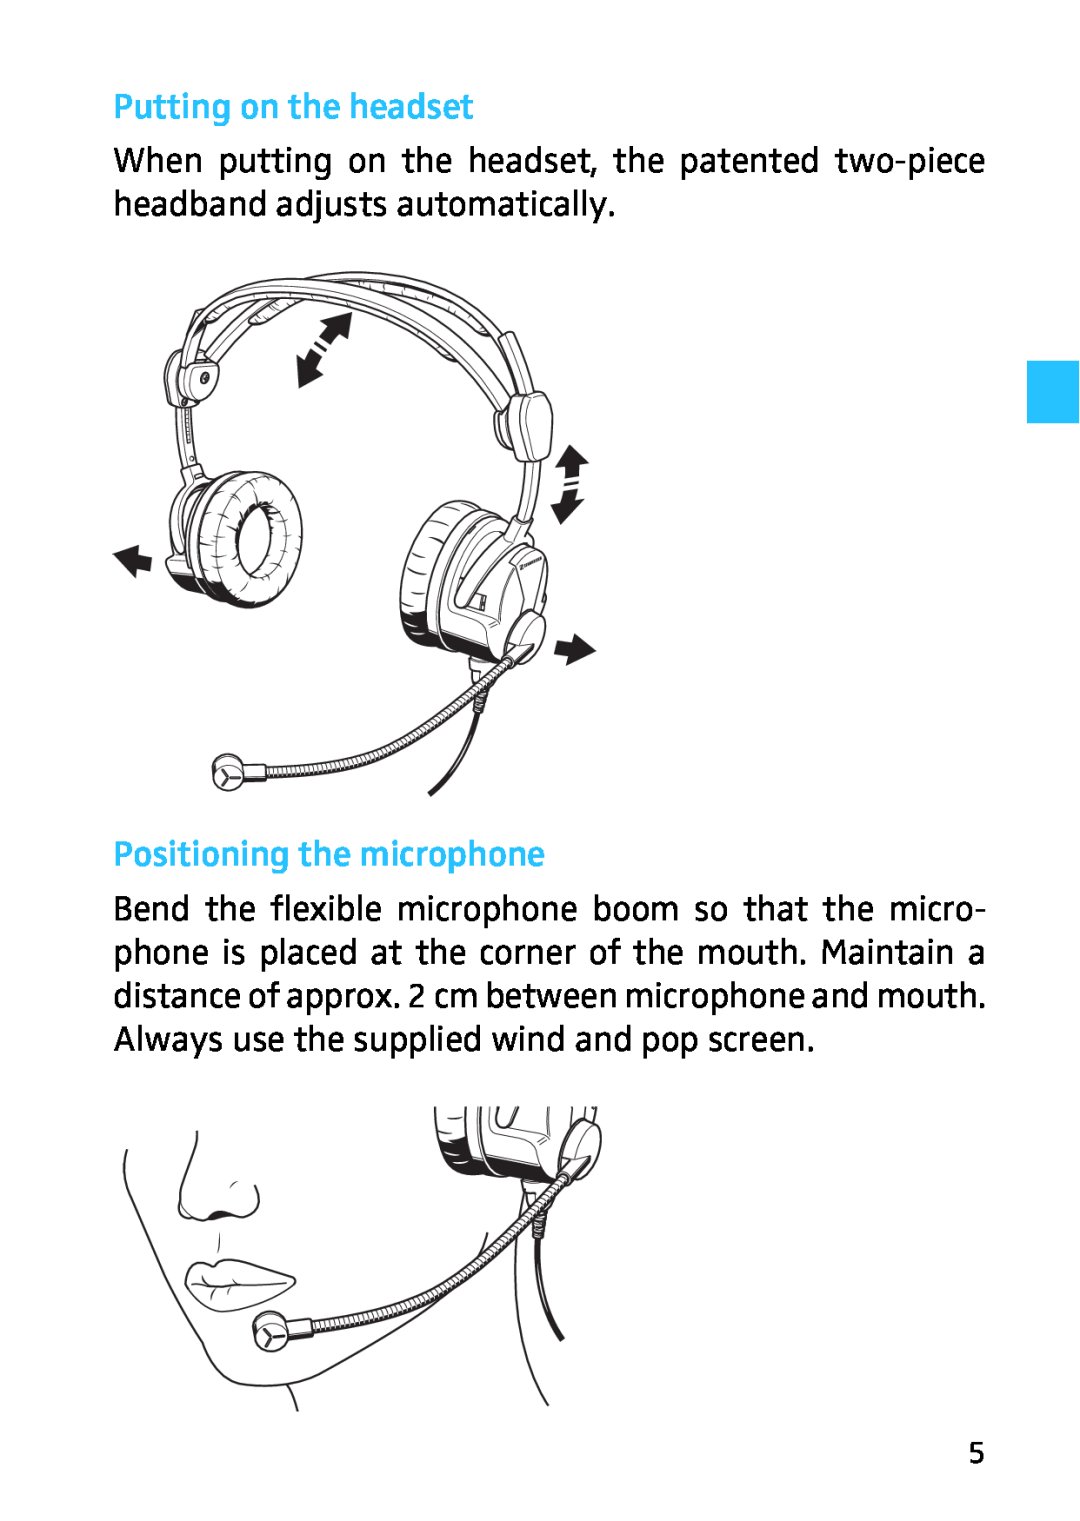 Sennheiser 523983/A01, HMEC 26, 502399 instruction manual Putting on the headset, Positioning the microphone 